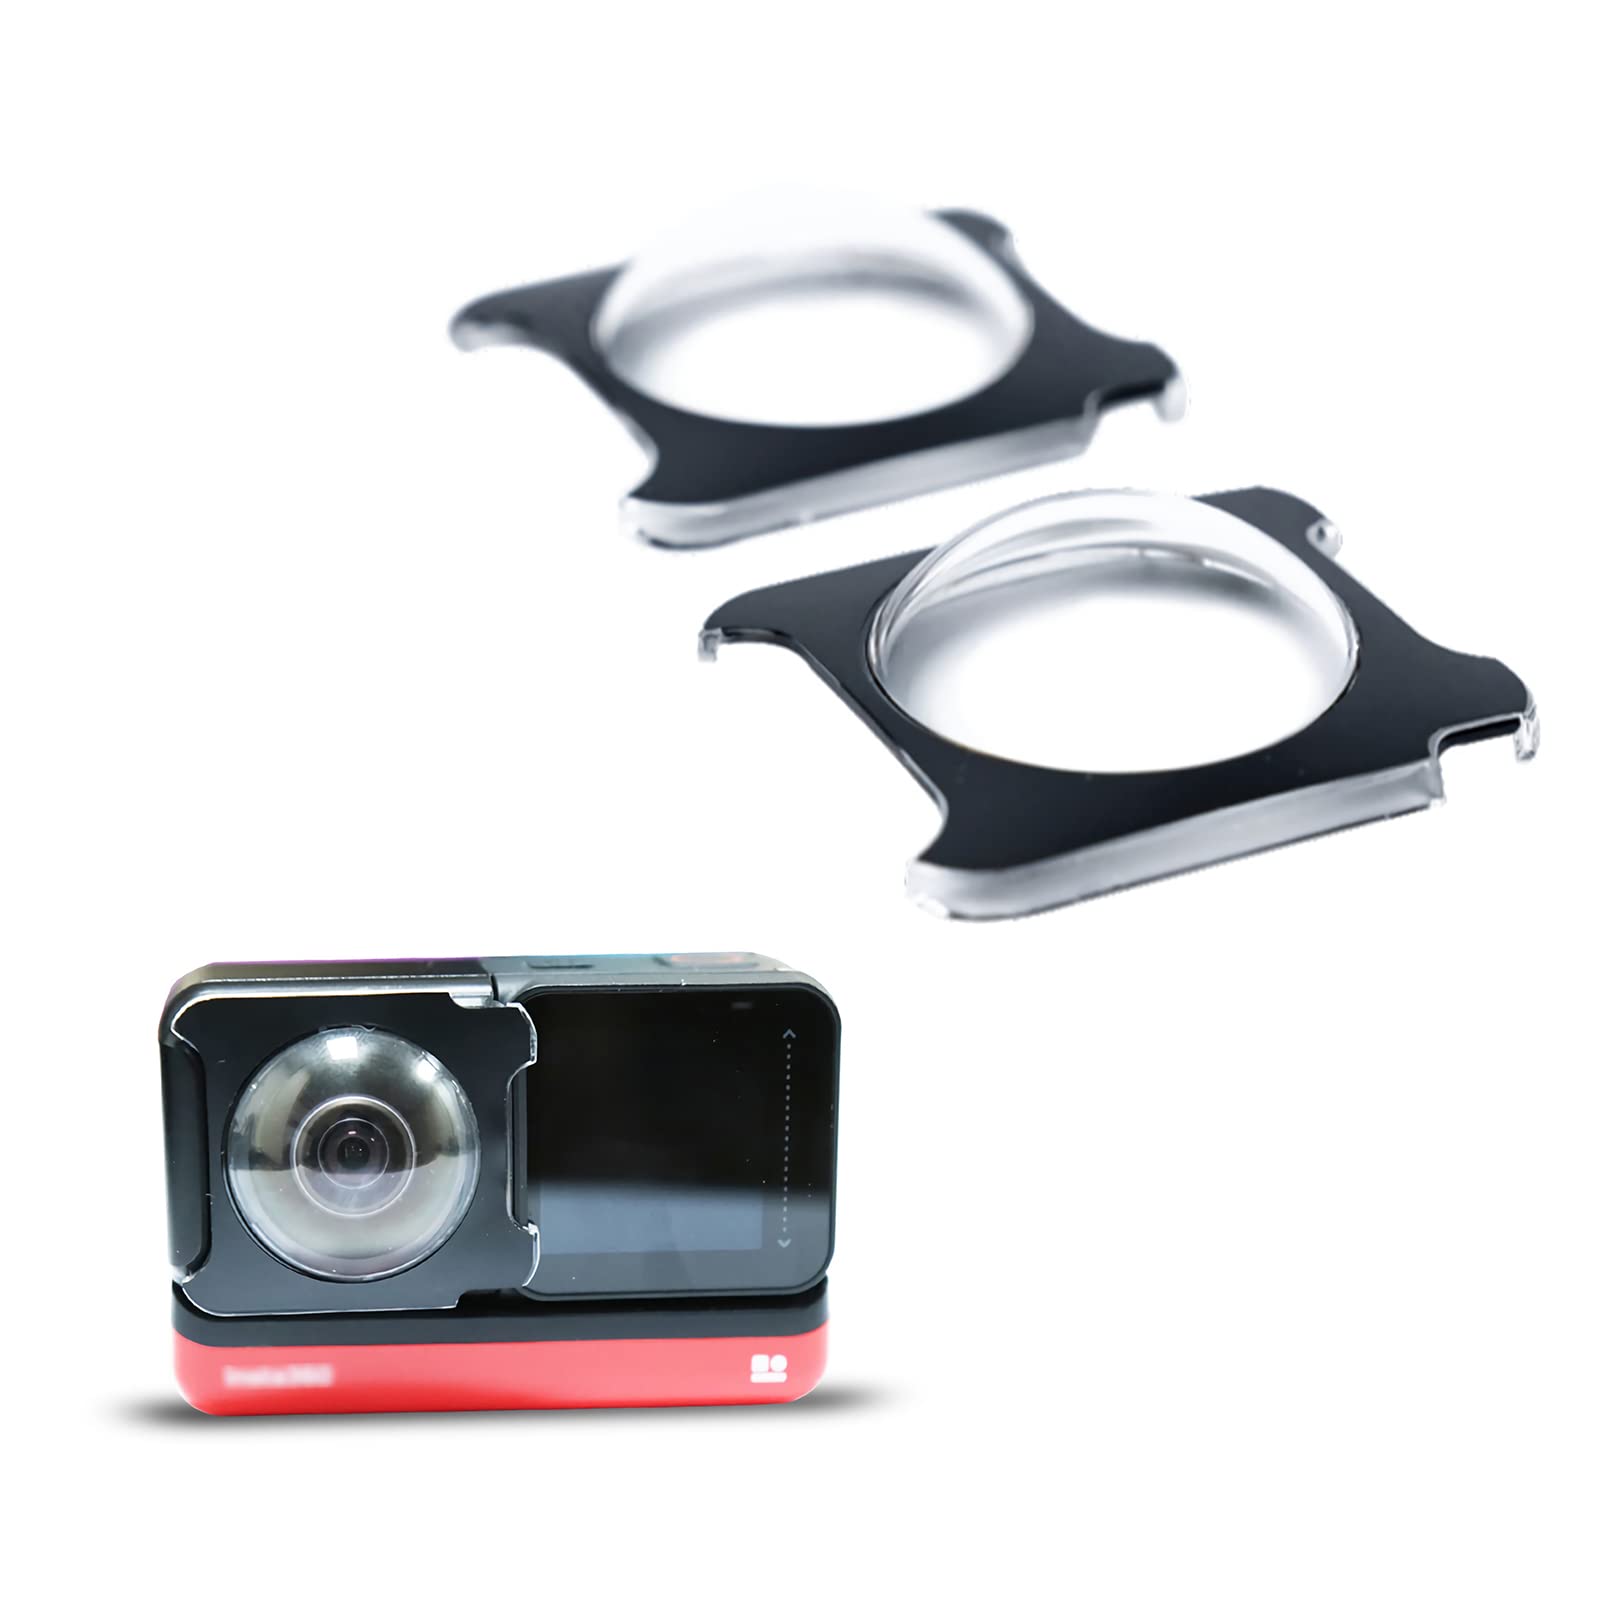 Sticky Dual Lens Guards for Insta360 One RS/ONE R Panoramic Lens Accessories, with Silicone Lens Cover